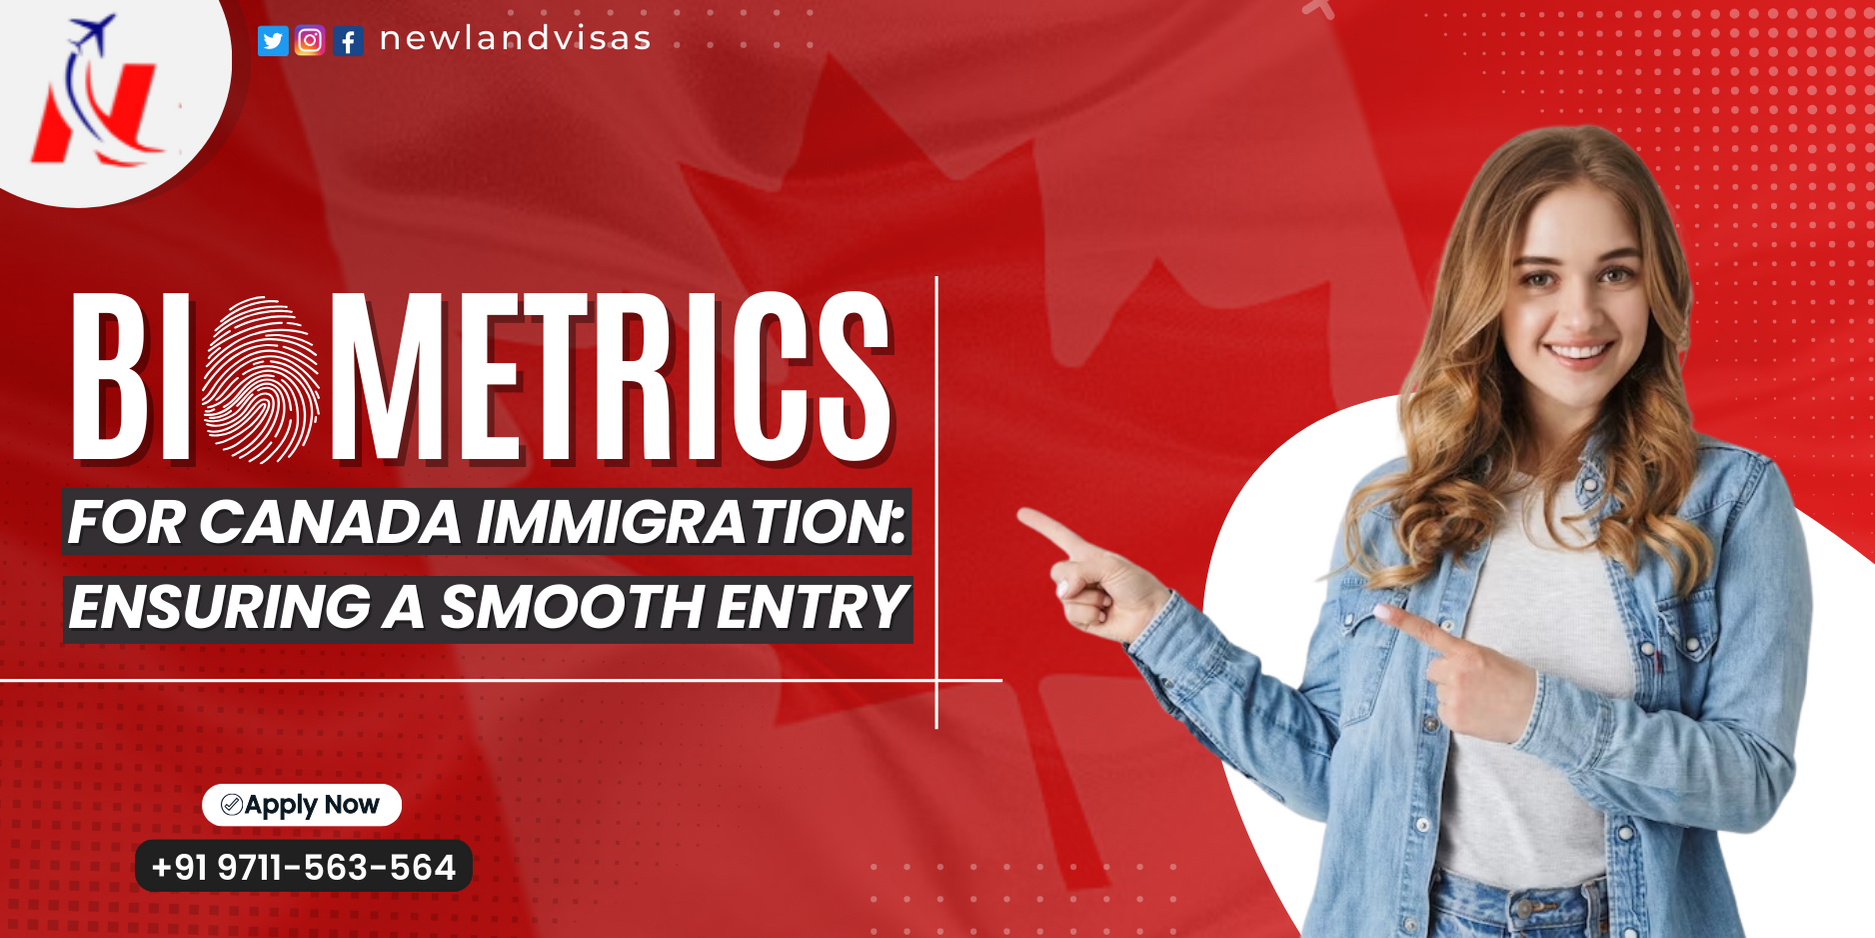 Biometric for Canada Immigration: Ensuring a Smooth Entry